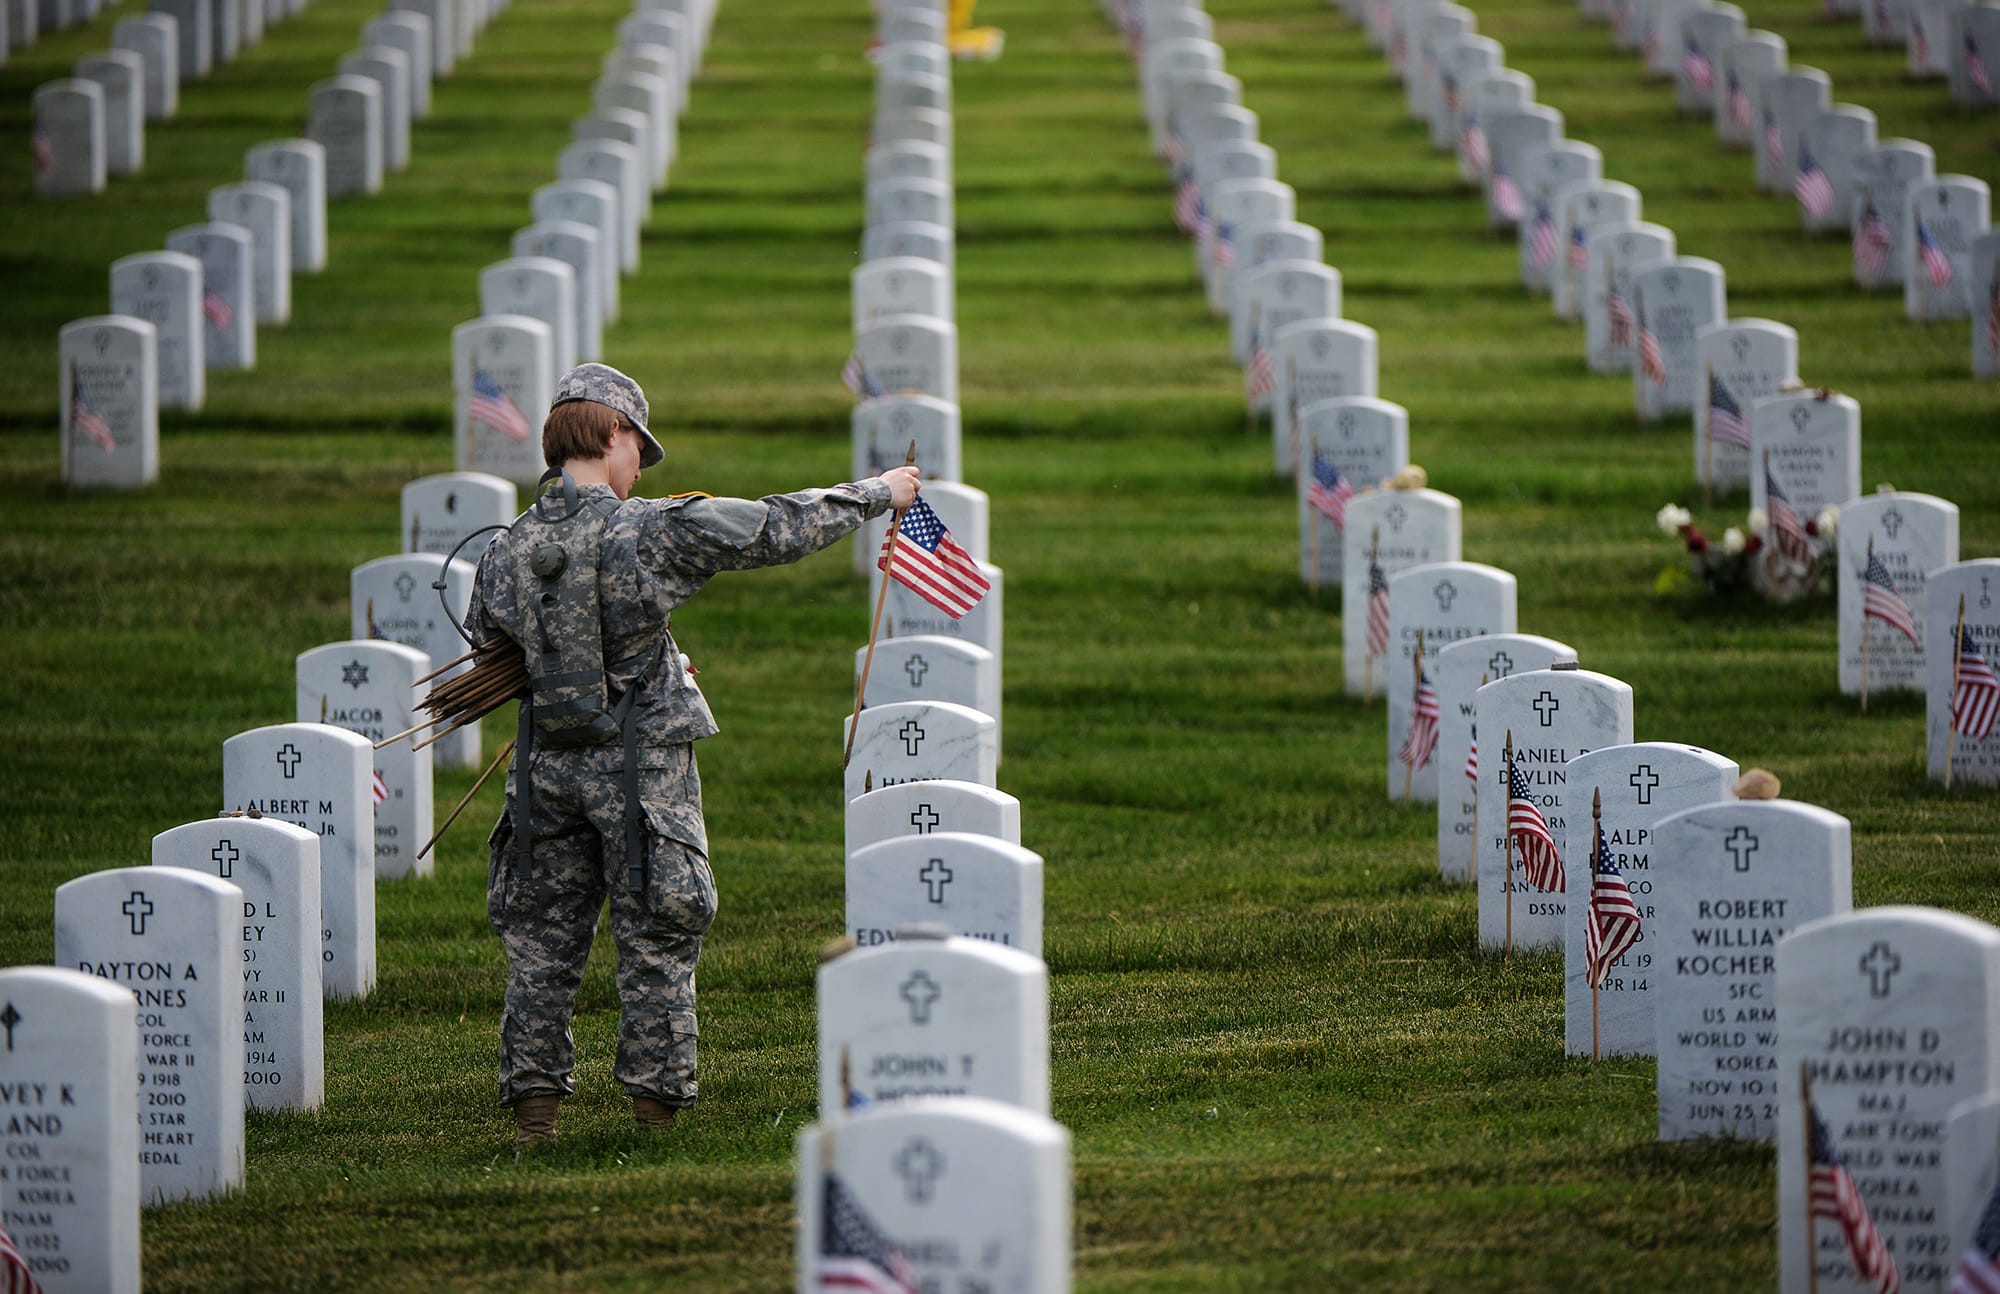 Bill O'Leary/The Washington Post
Staff Sgt. Kerrin Kampa, of the Old Guard Fife and Drum corps, places flags in front of headstones at Arlington Memorial Cemetery for Memorial Day in 2013 in Arlington, Va. The cemetery has been added to the National Register of Historic Places.